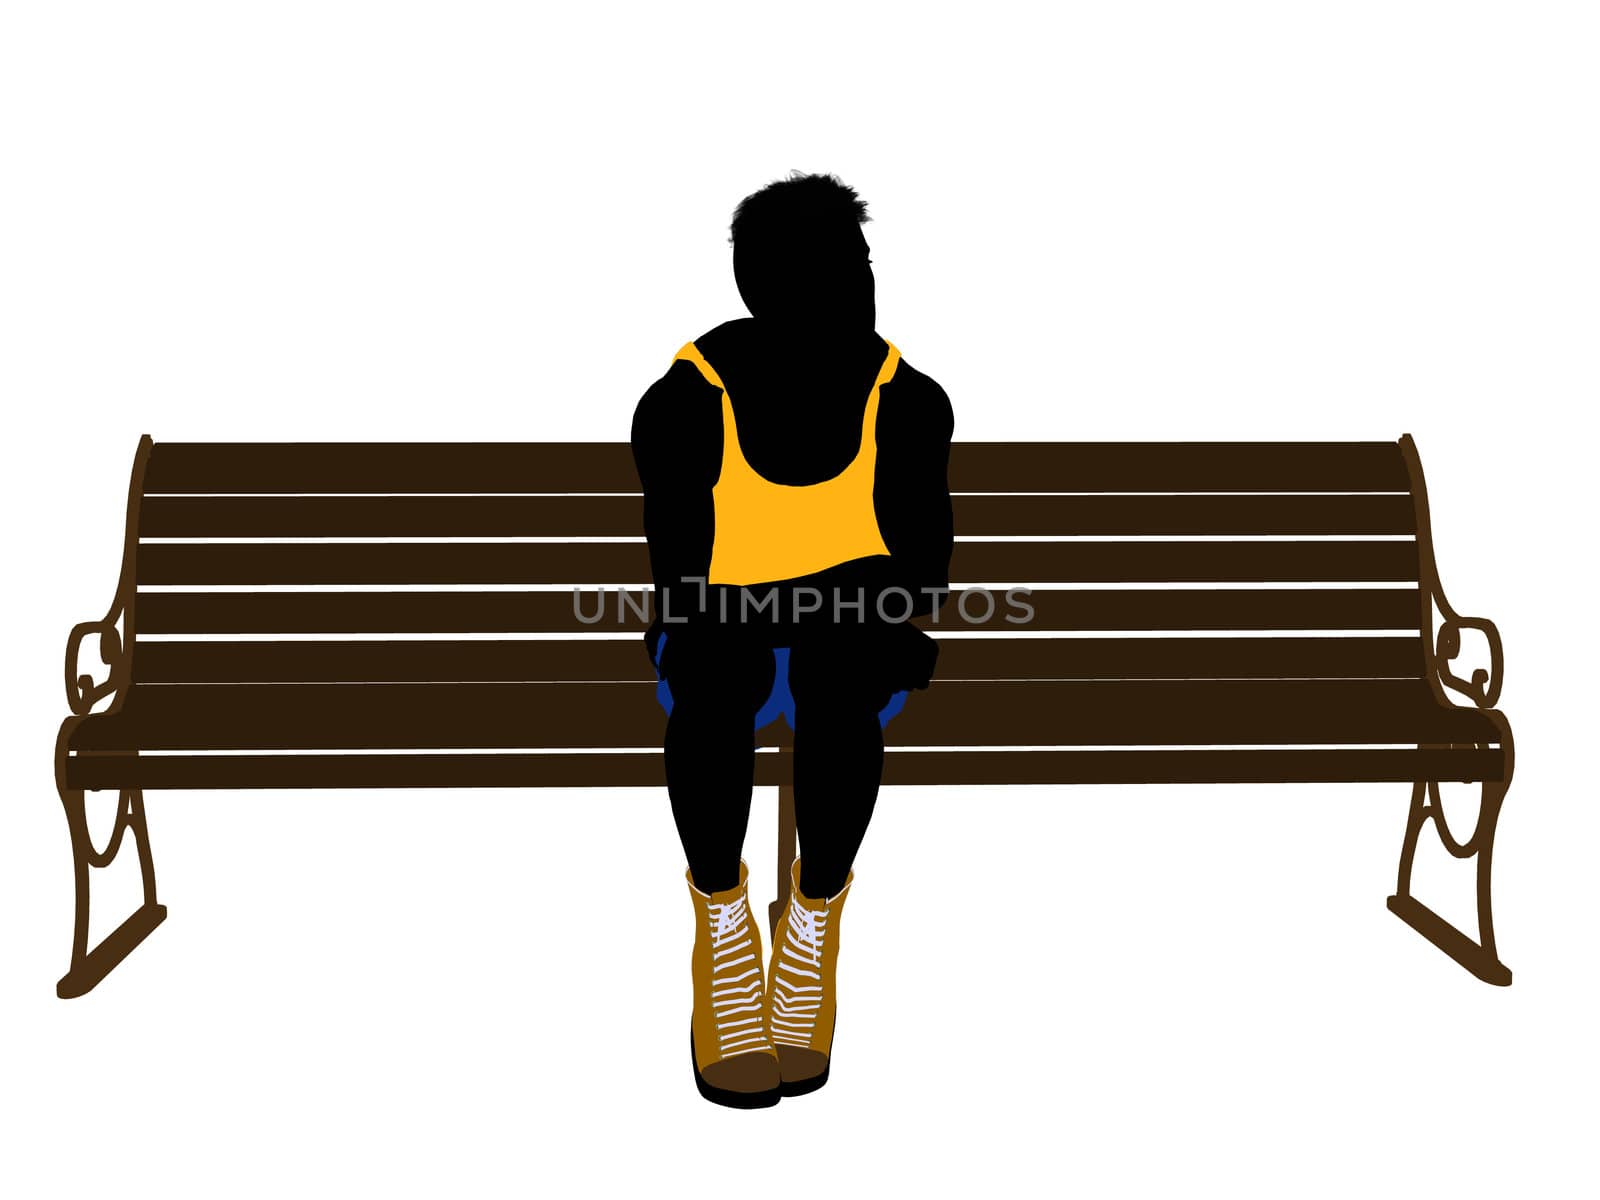 Male athlete sitting on a bench silhouette on a white background